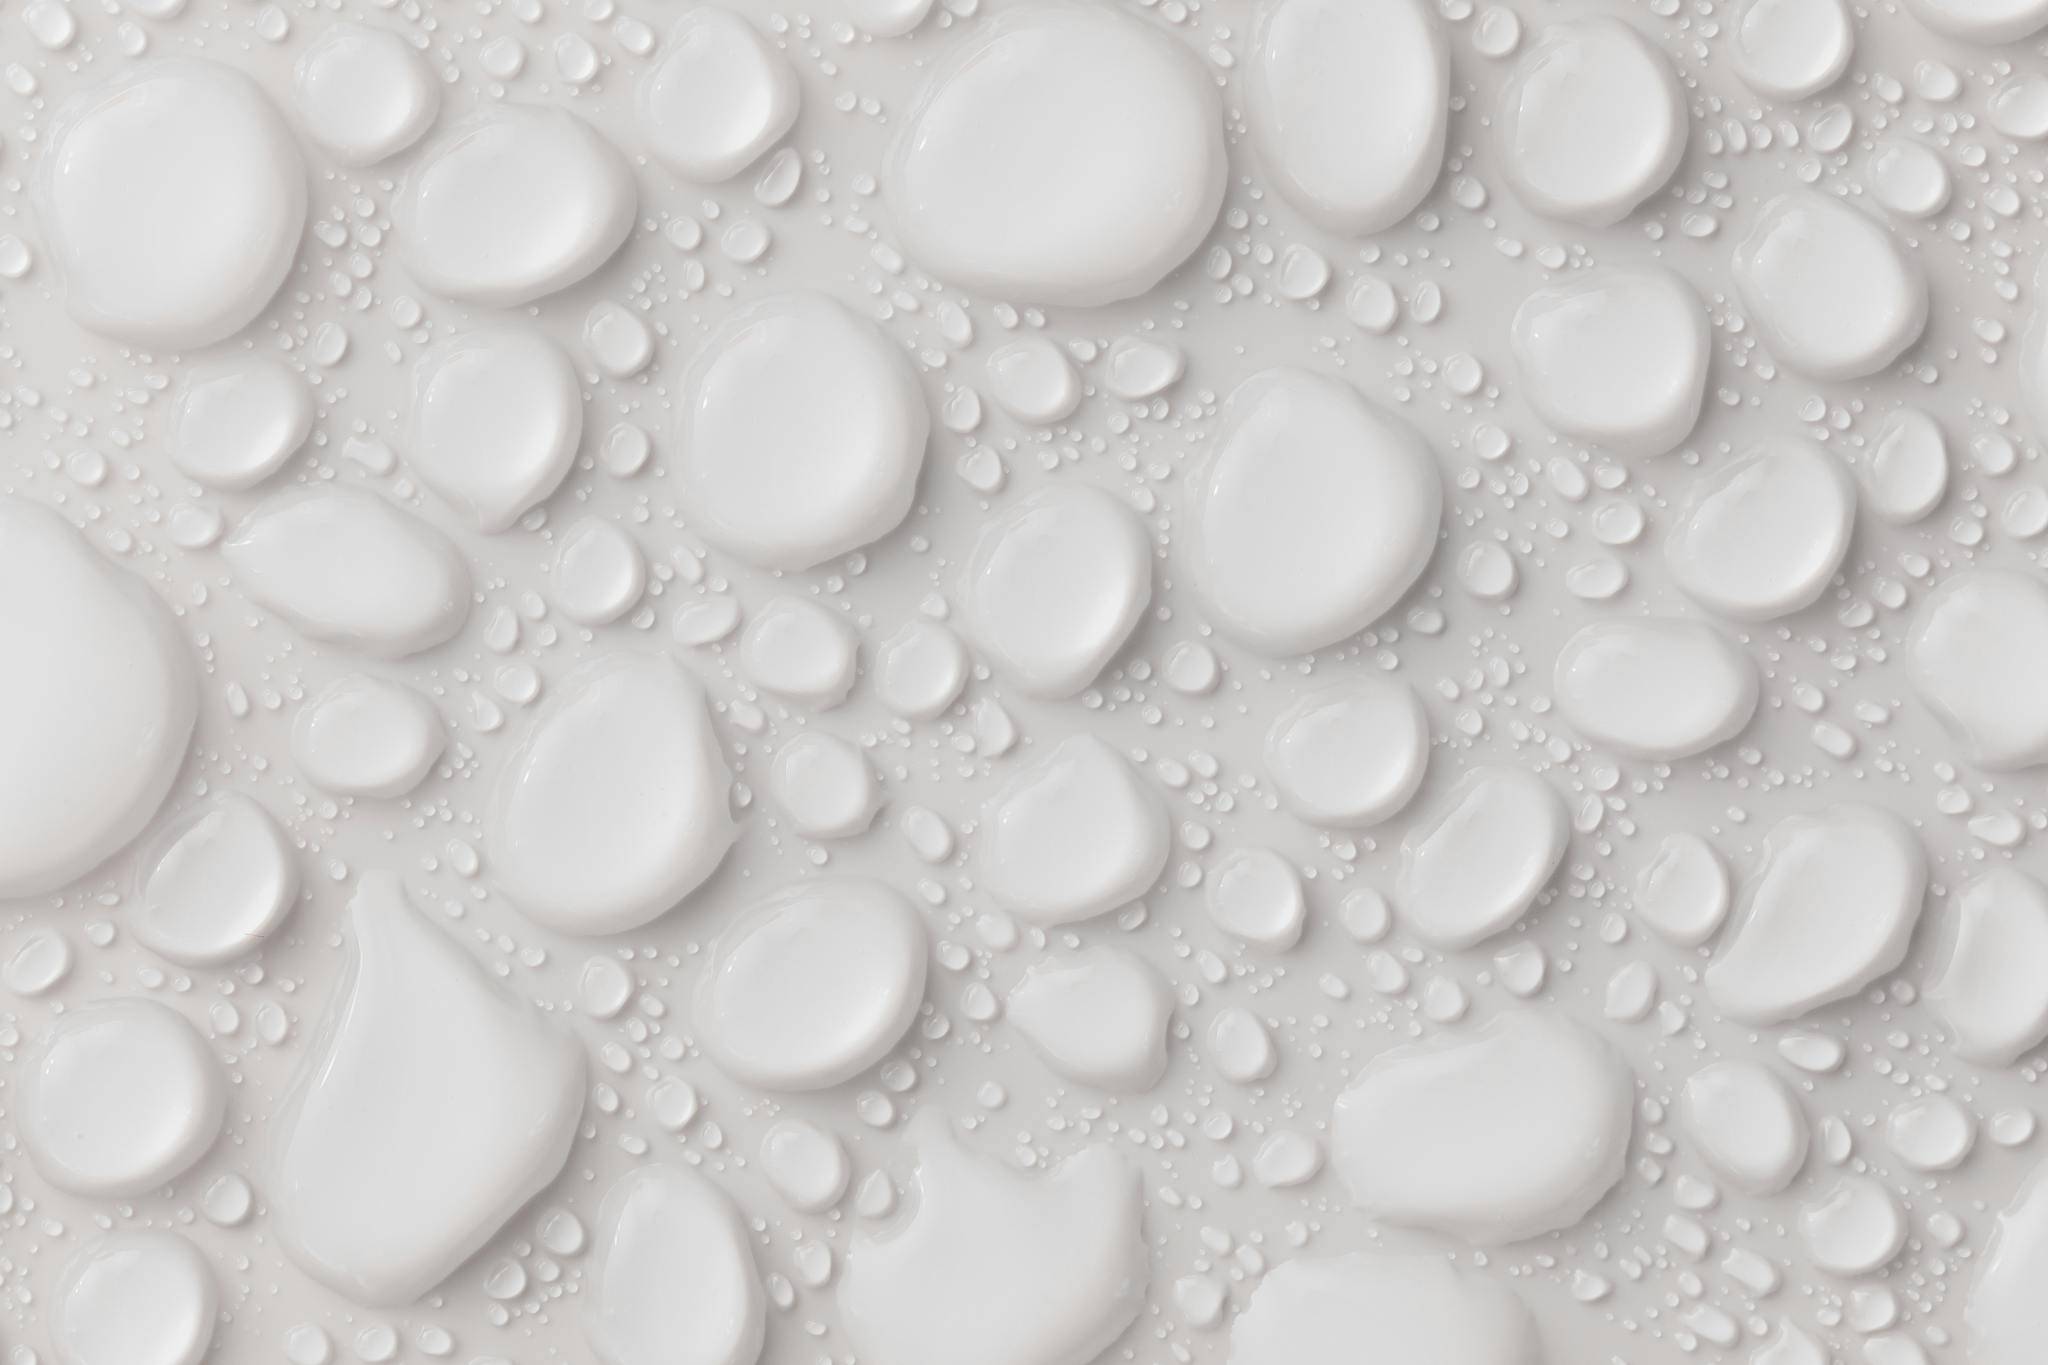 Abstract background with white glassy drops